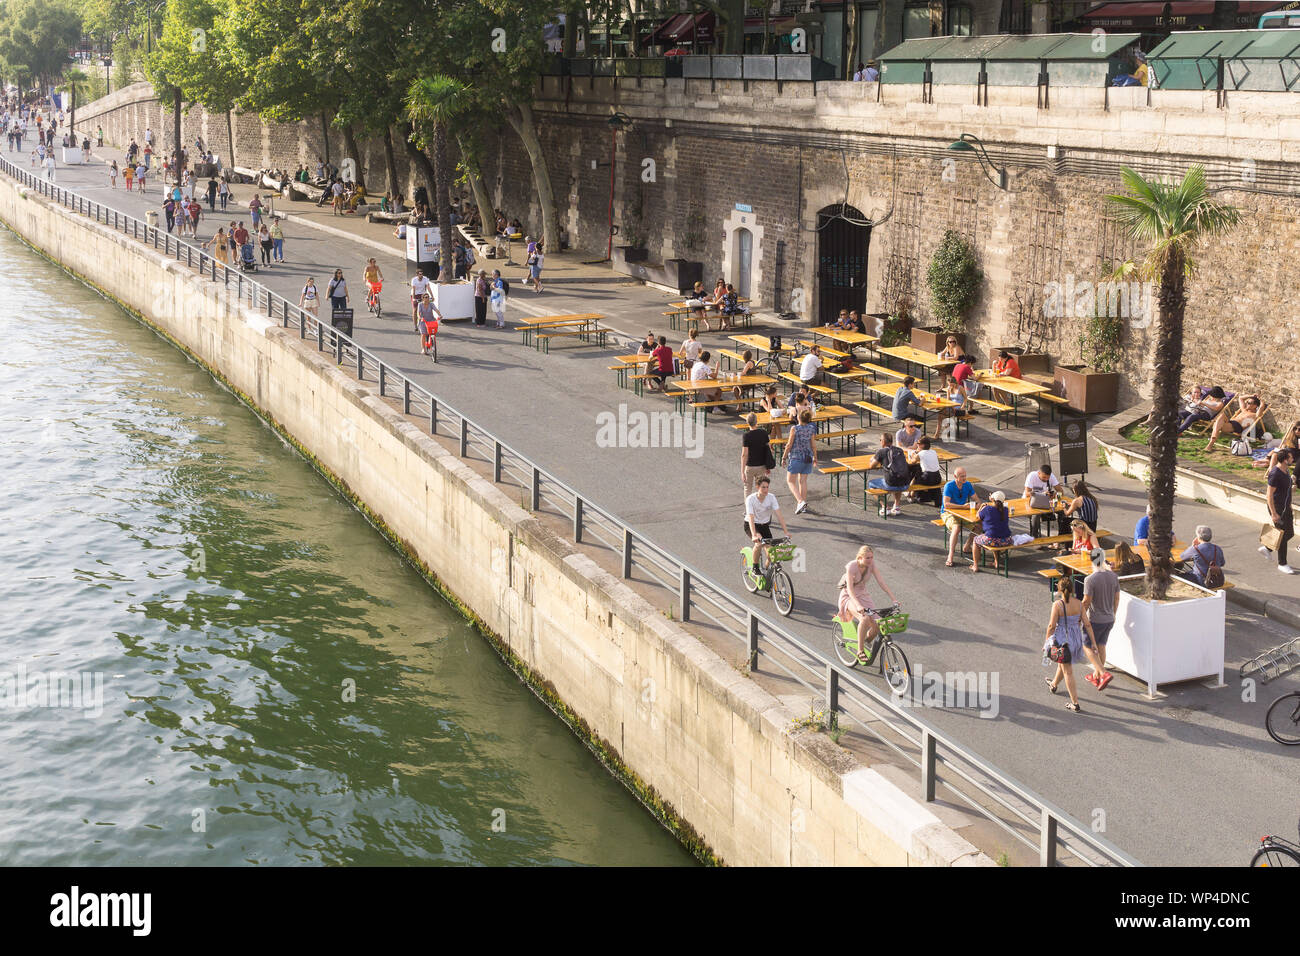 Paris riverbank - people enjoying summer on the Seine riverbank in the 1st arrondissement of Paris, France, Europe. Stock Photo